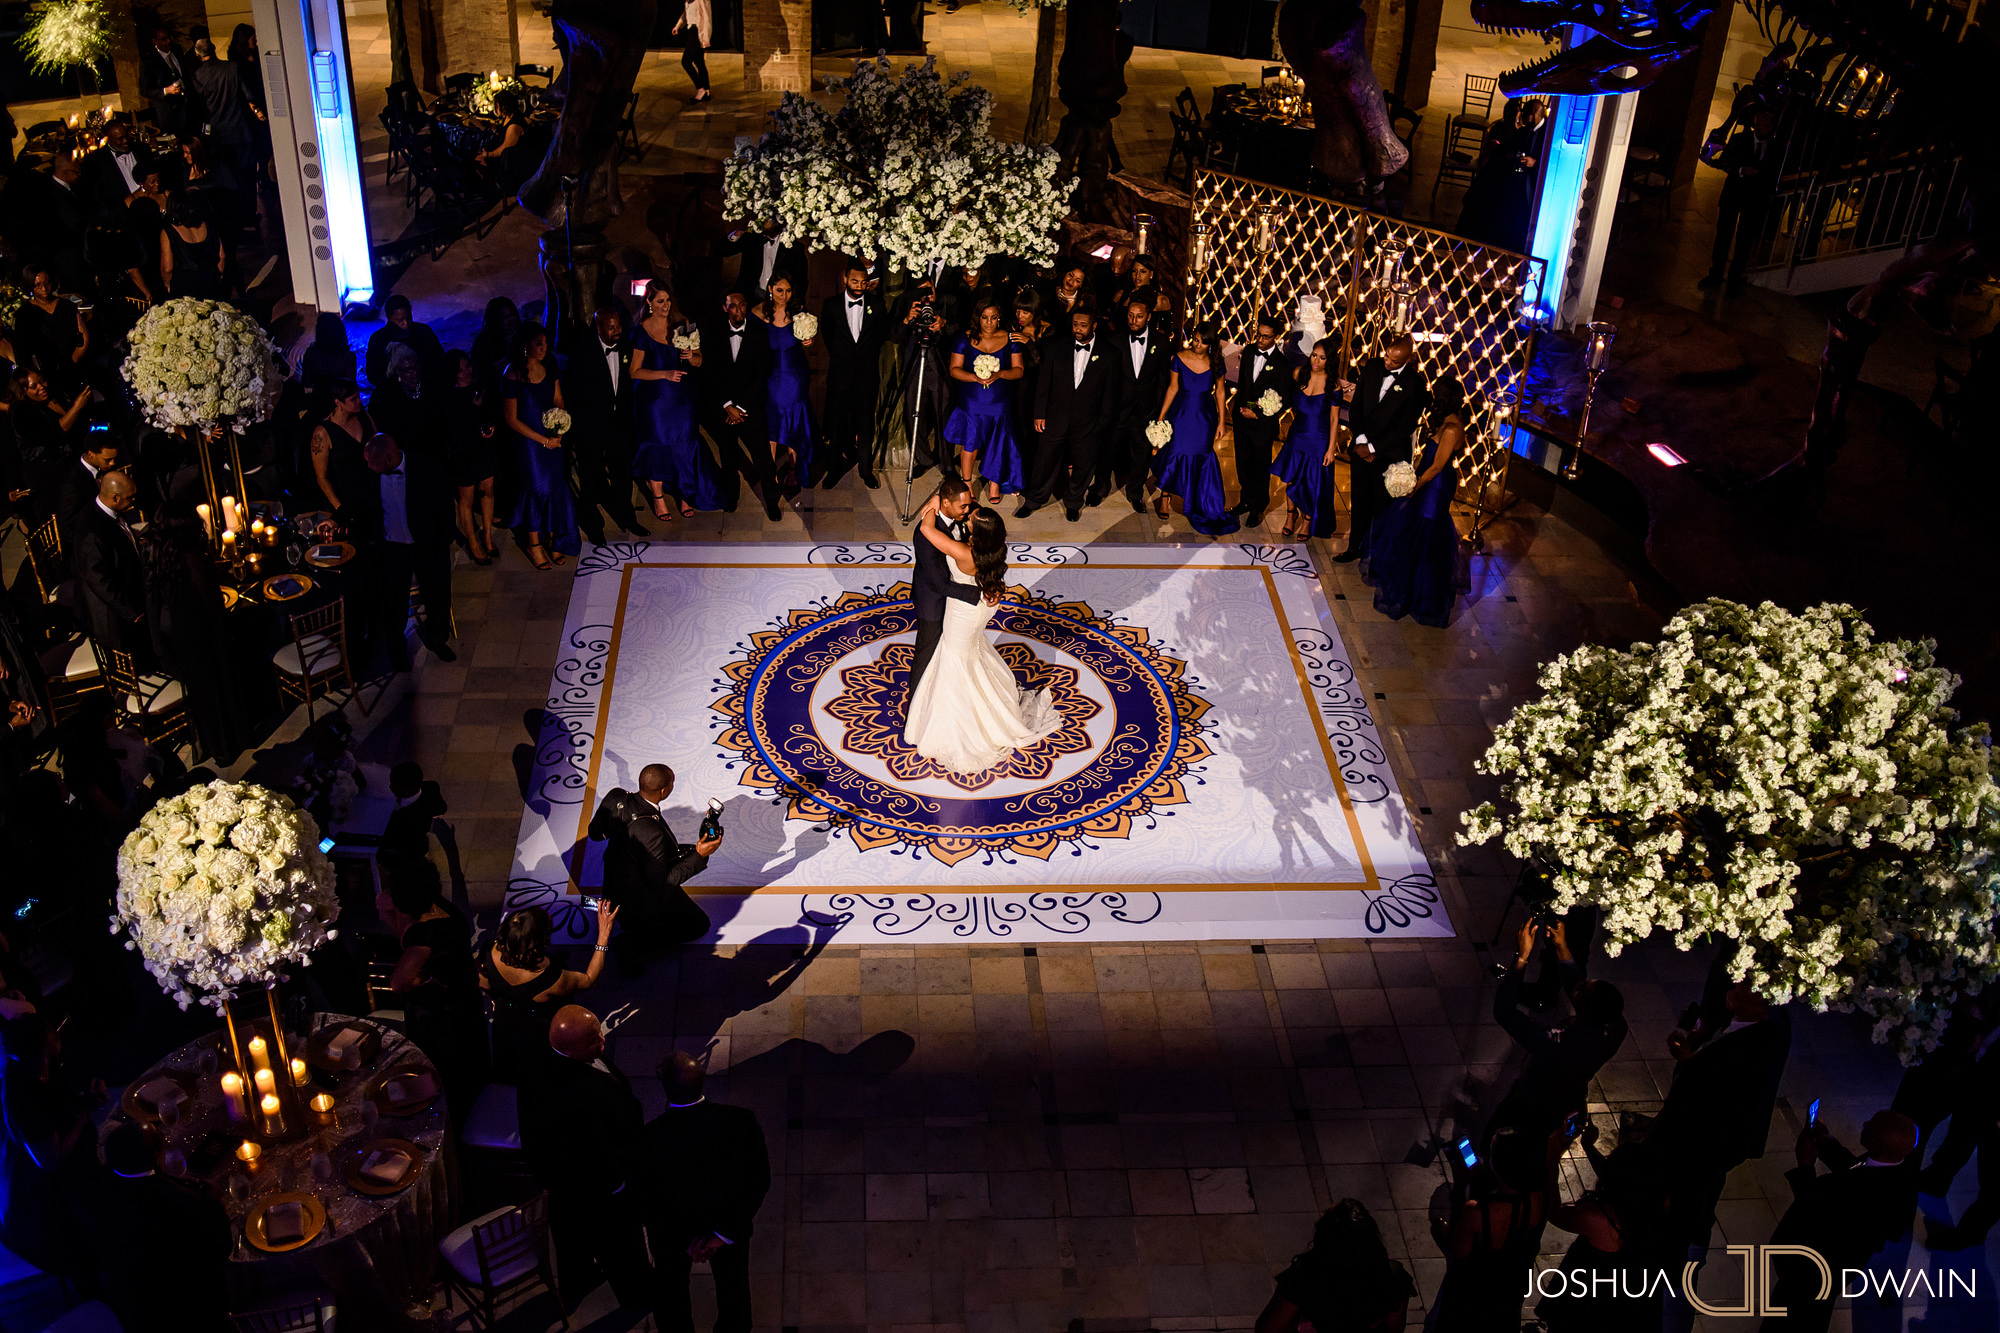 Alena & Prince's Wedding at the Fernbank Museum of Natural History